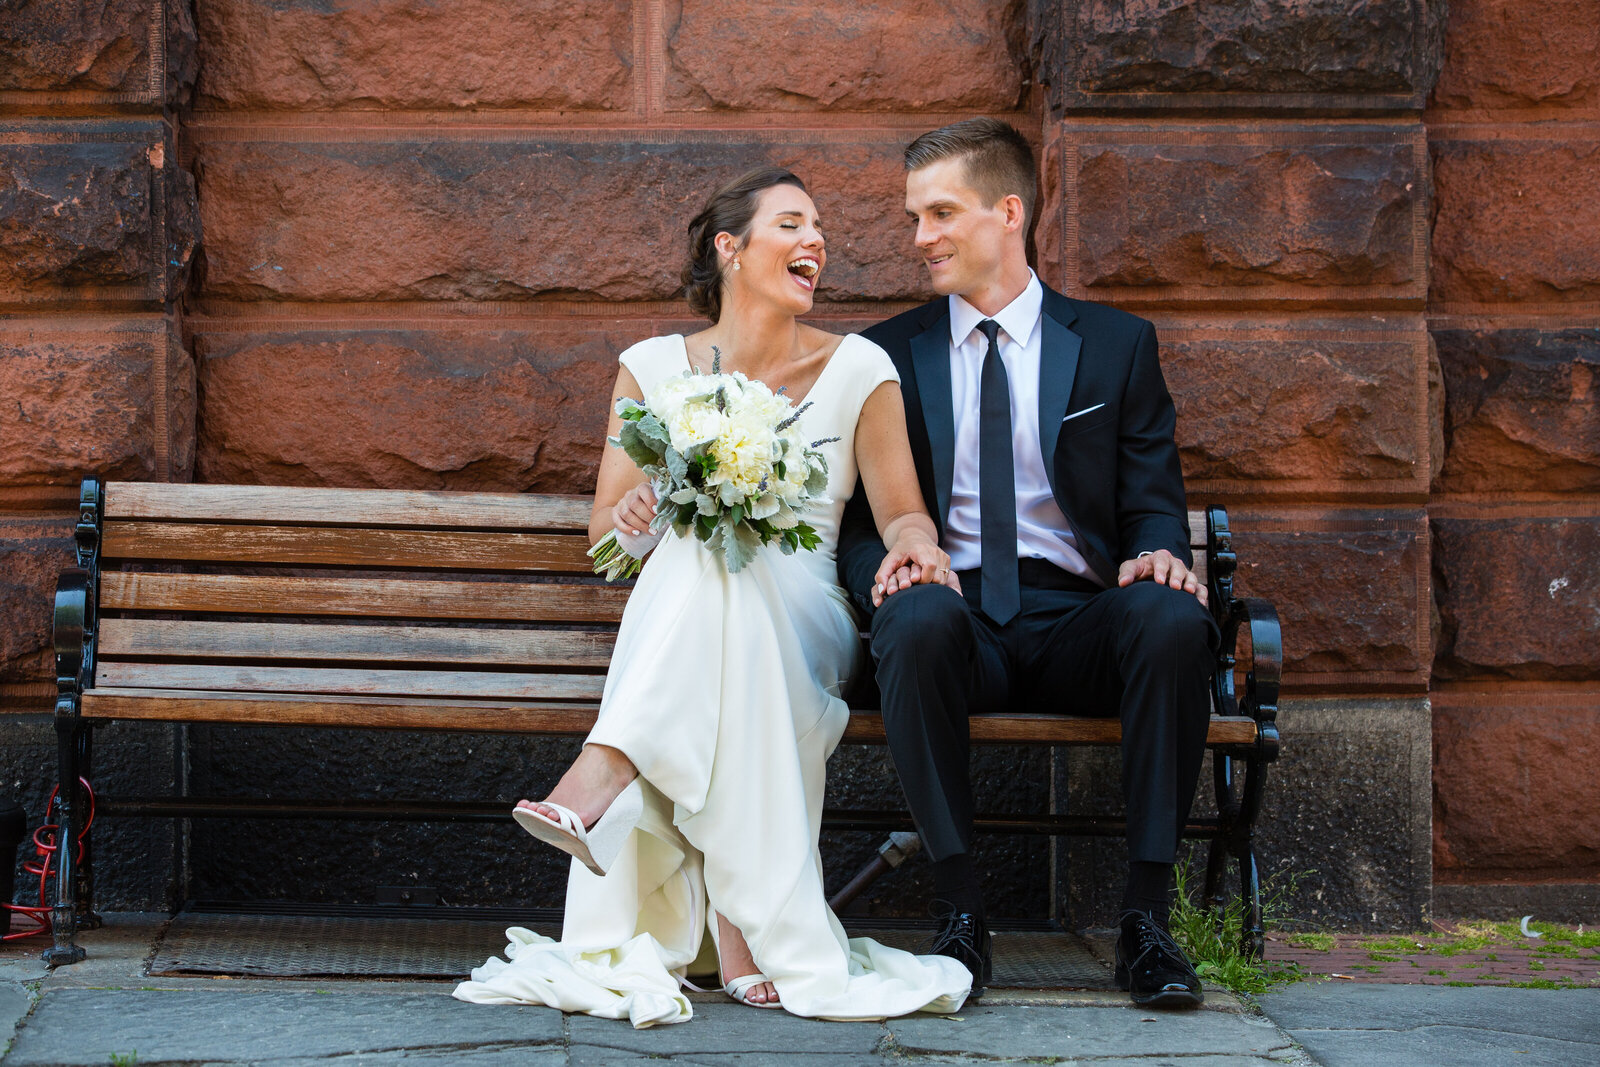 couple laughs on bench in front of brick wall